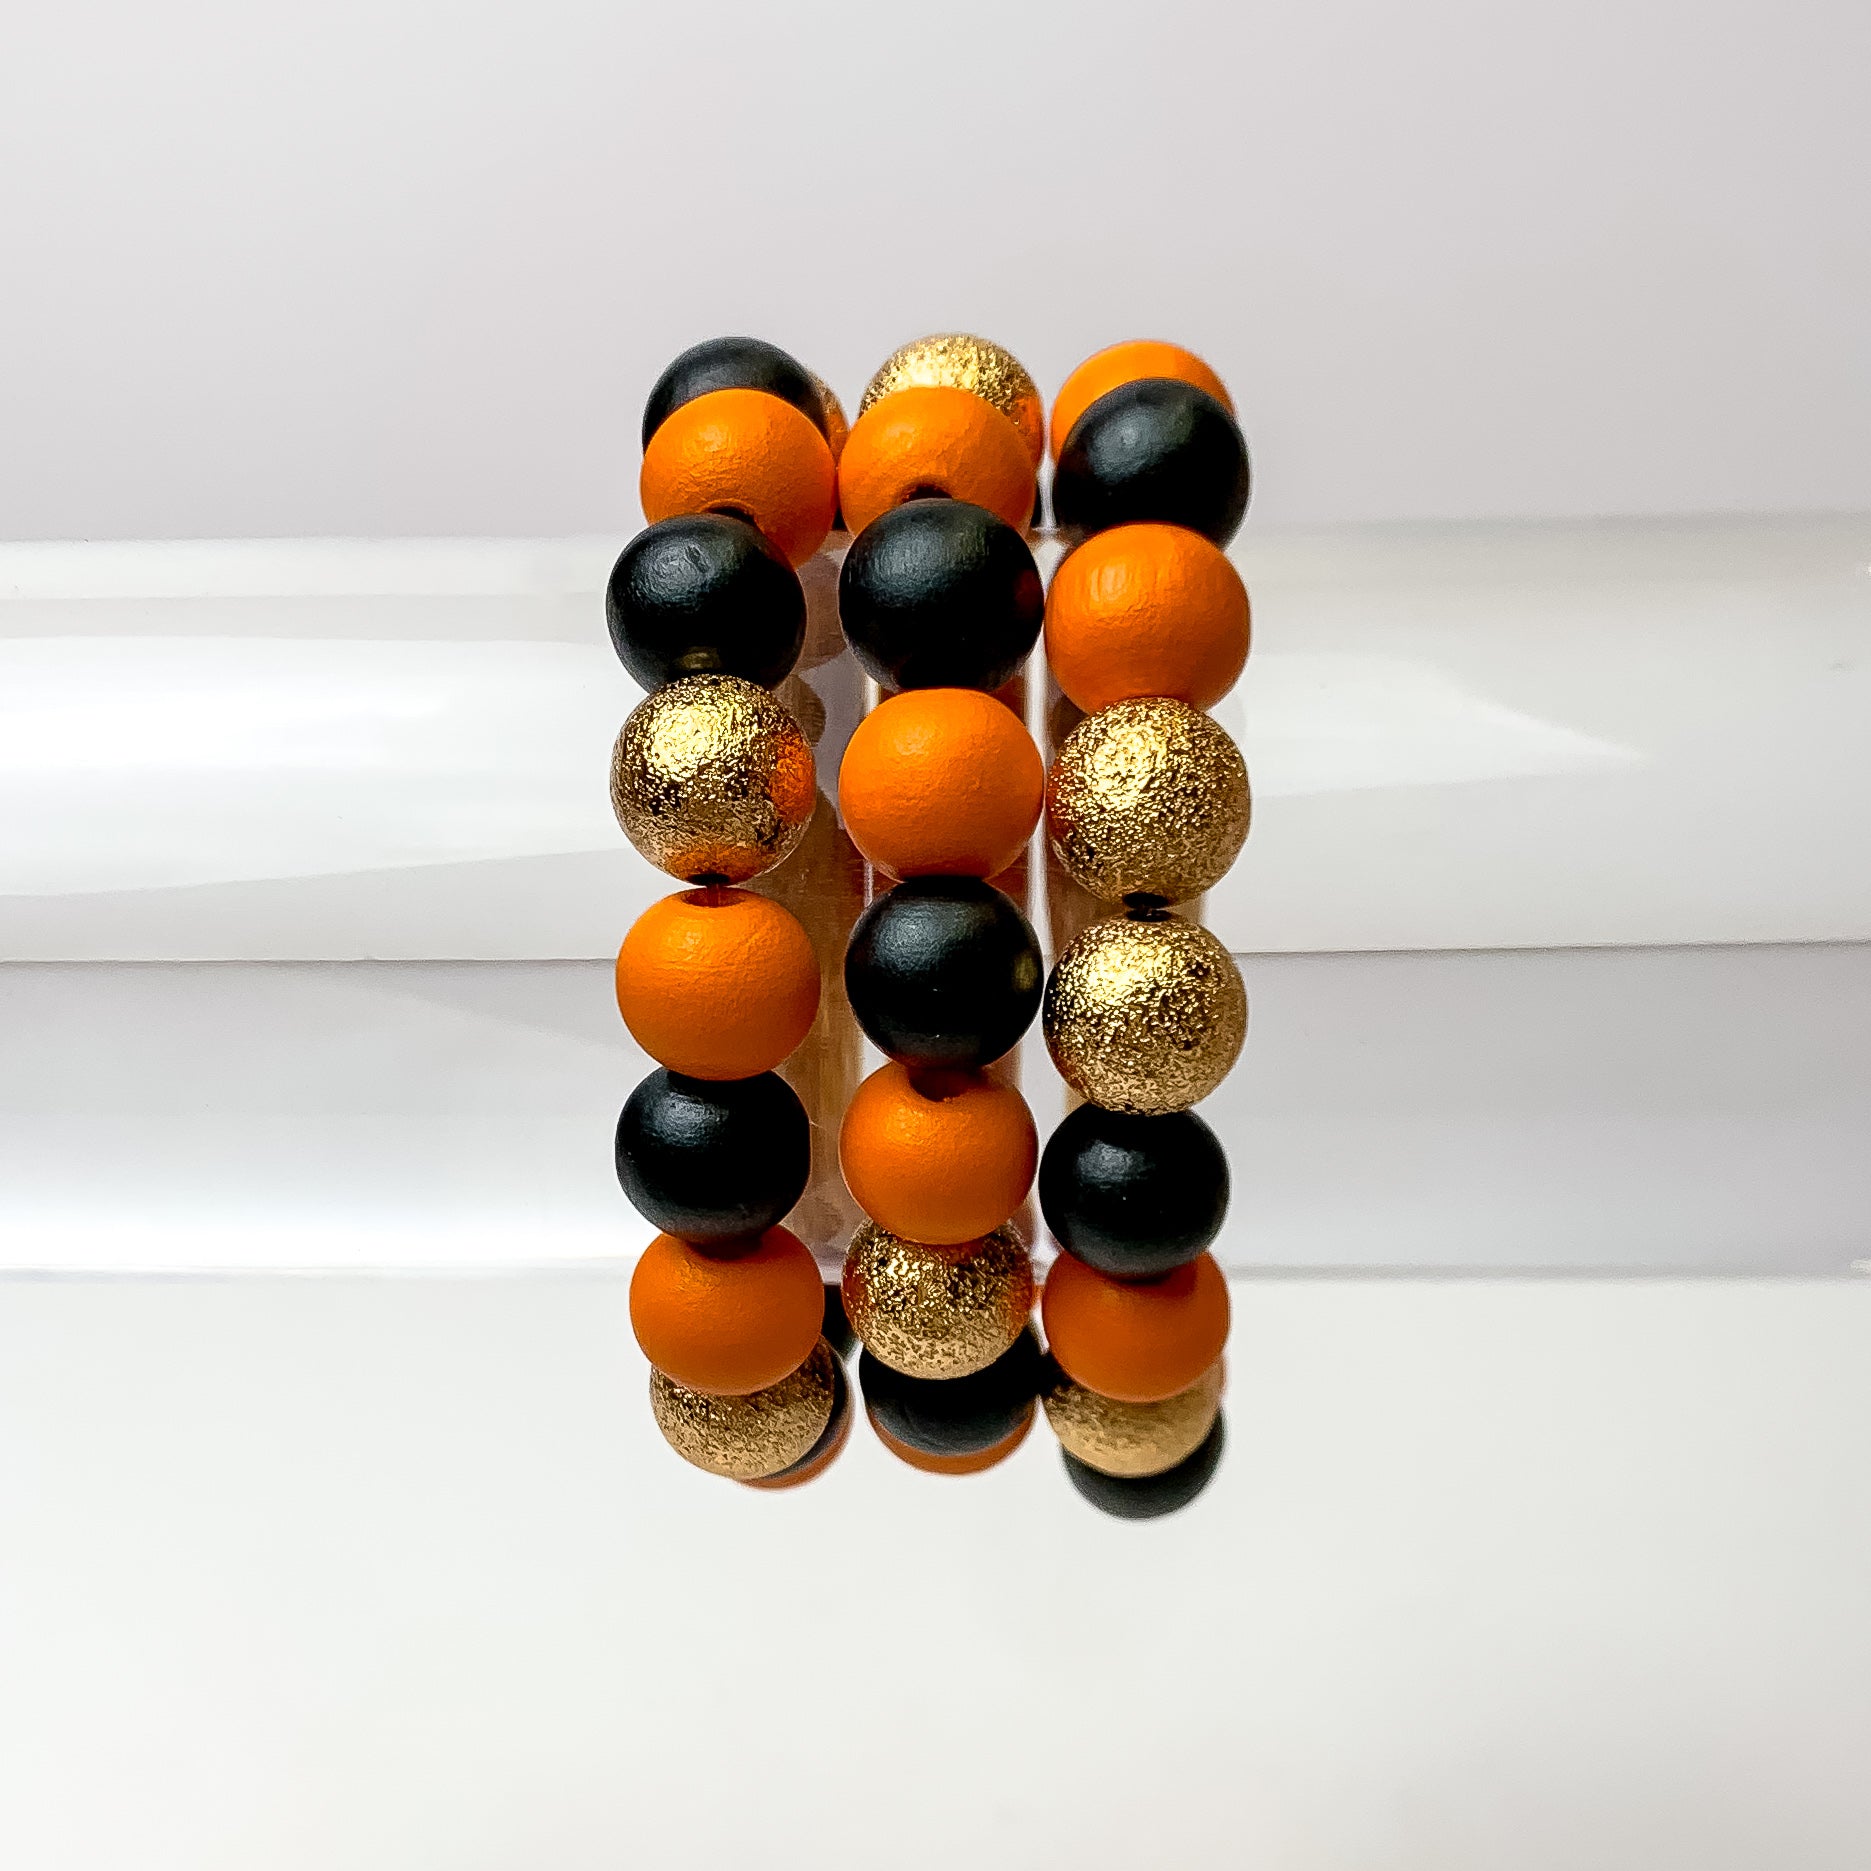 his set of 3 bracelets in the colors orange and black are placed on a clear bracelet display featuring a white background.